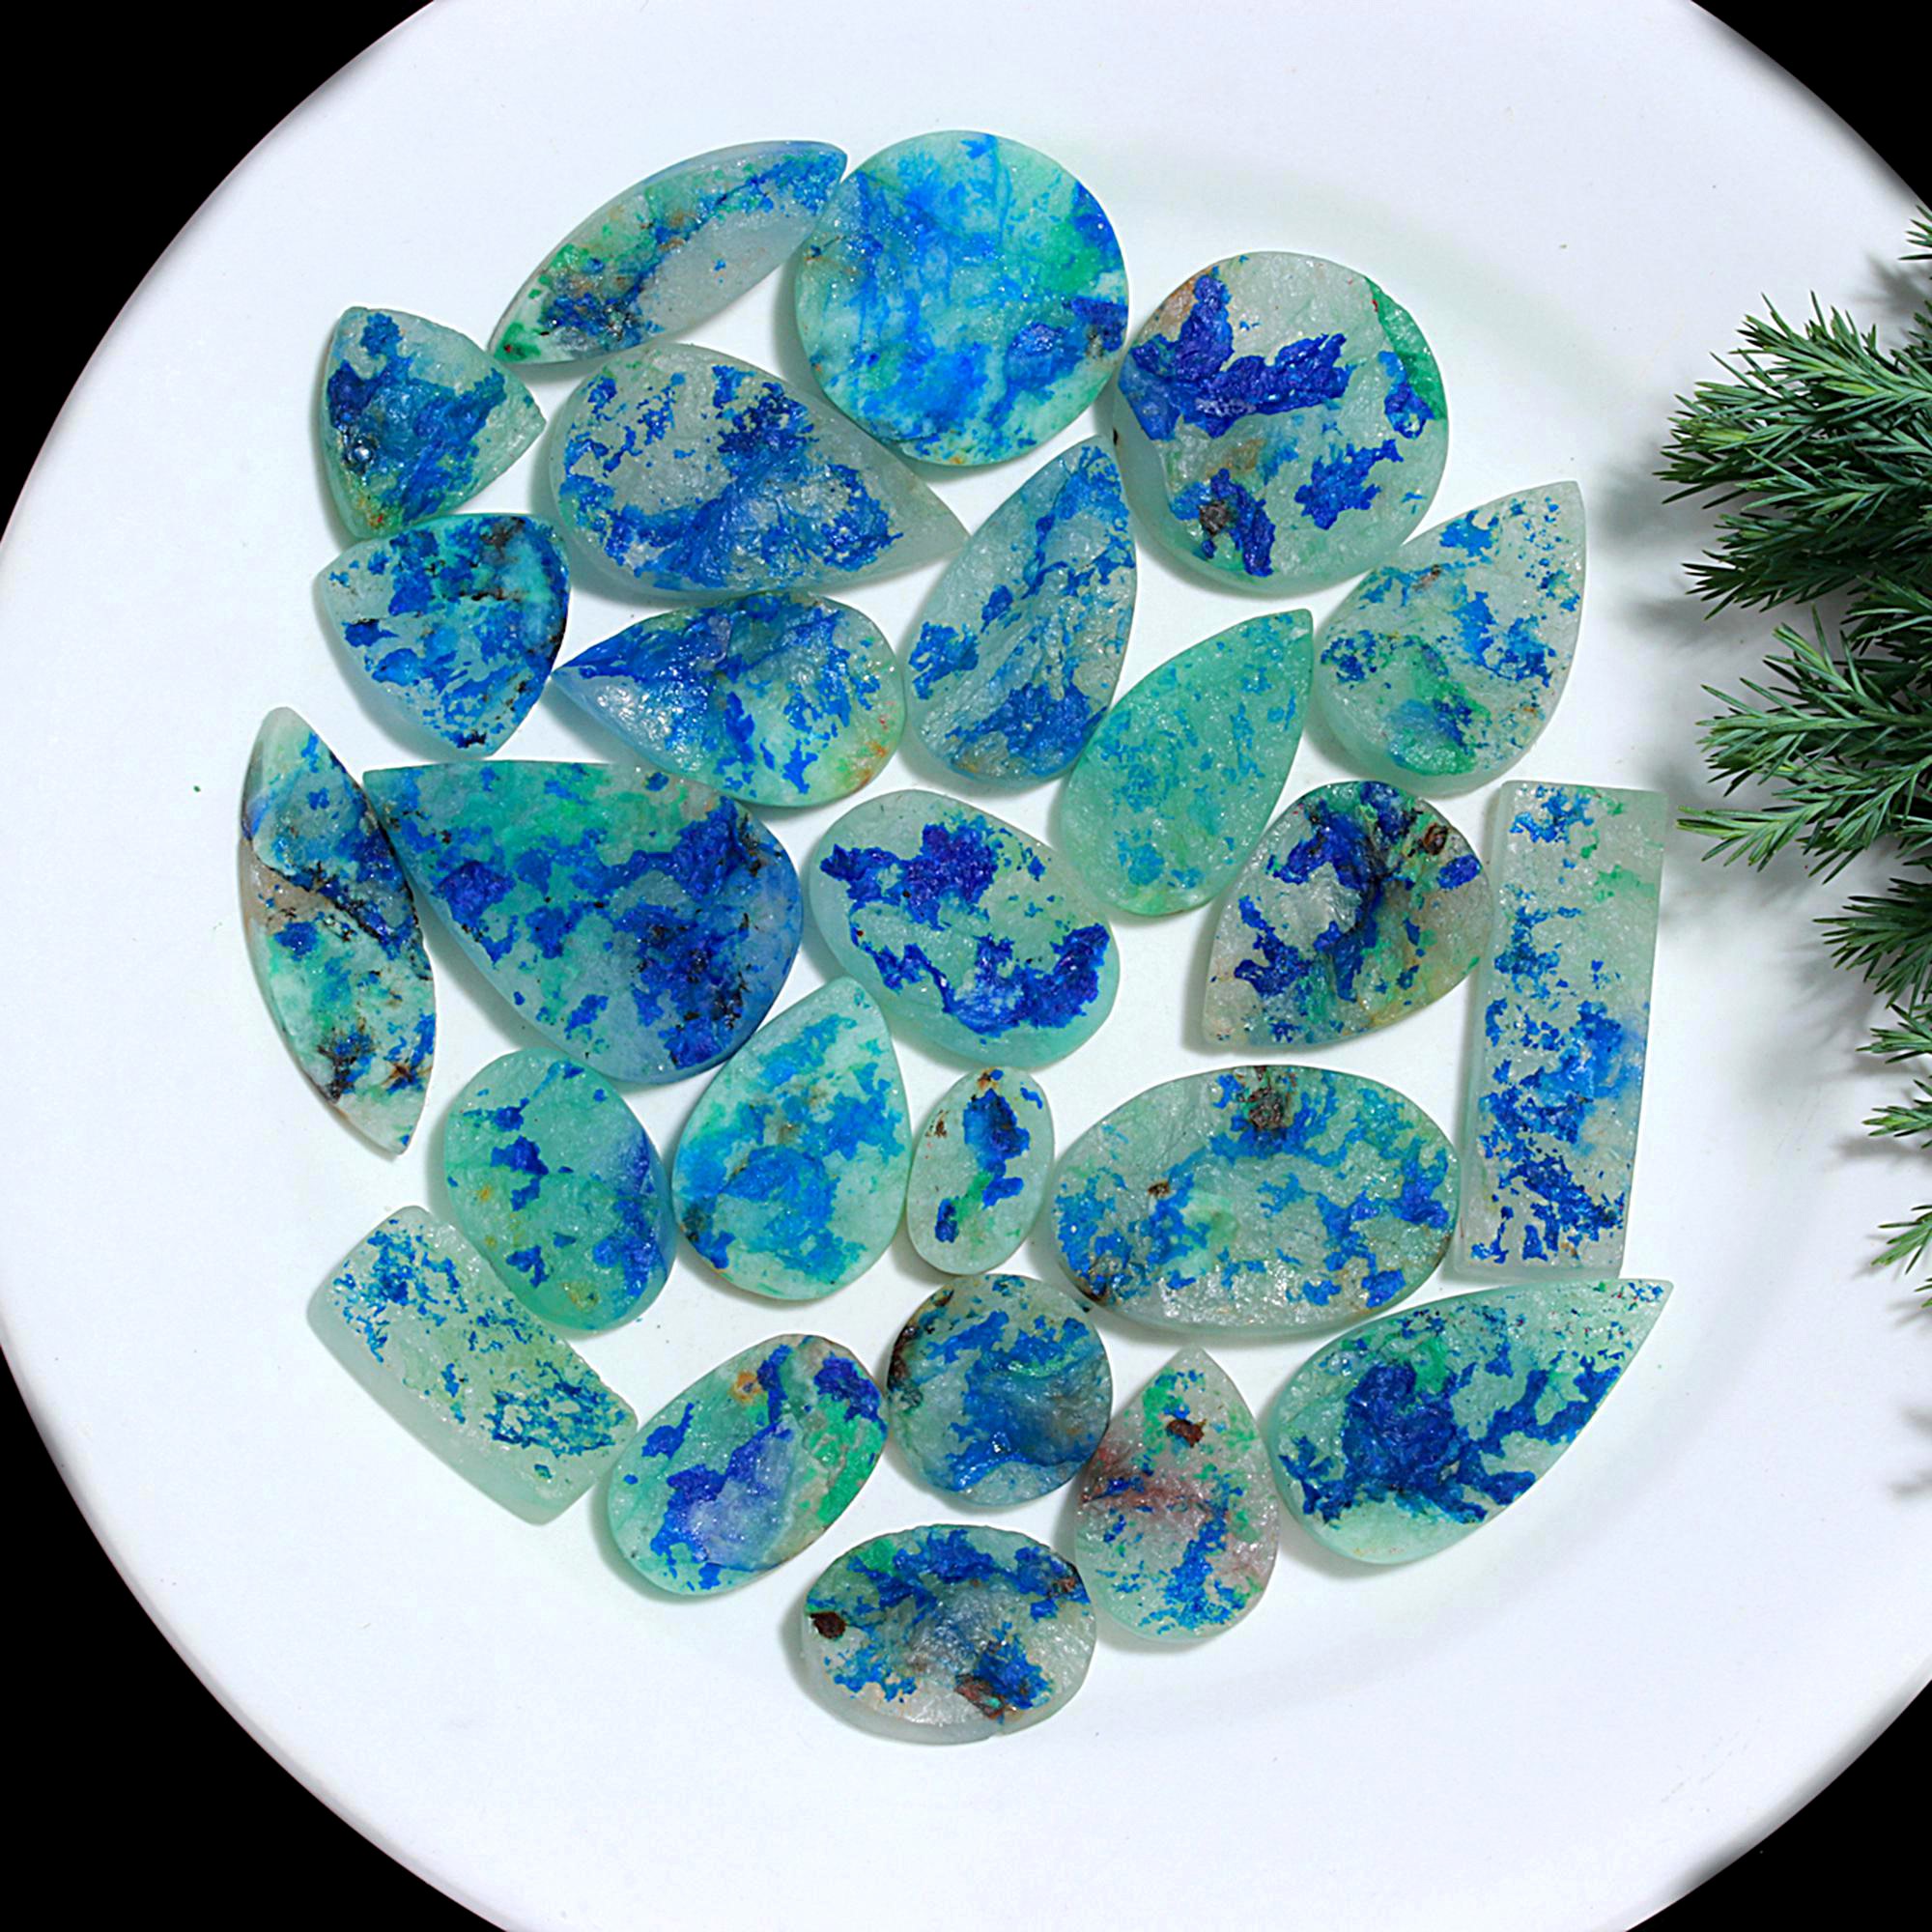 25 Pcs 752.Cts Natural Azurite Druzy Unpolished Loose Cabochon Gemstone For Jewelry Wholesale Lot Size 40x14 17x11mm